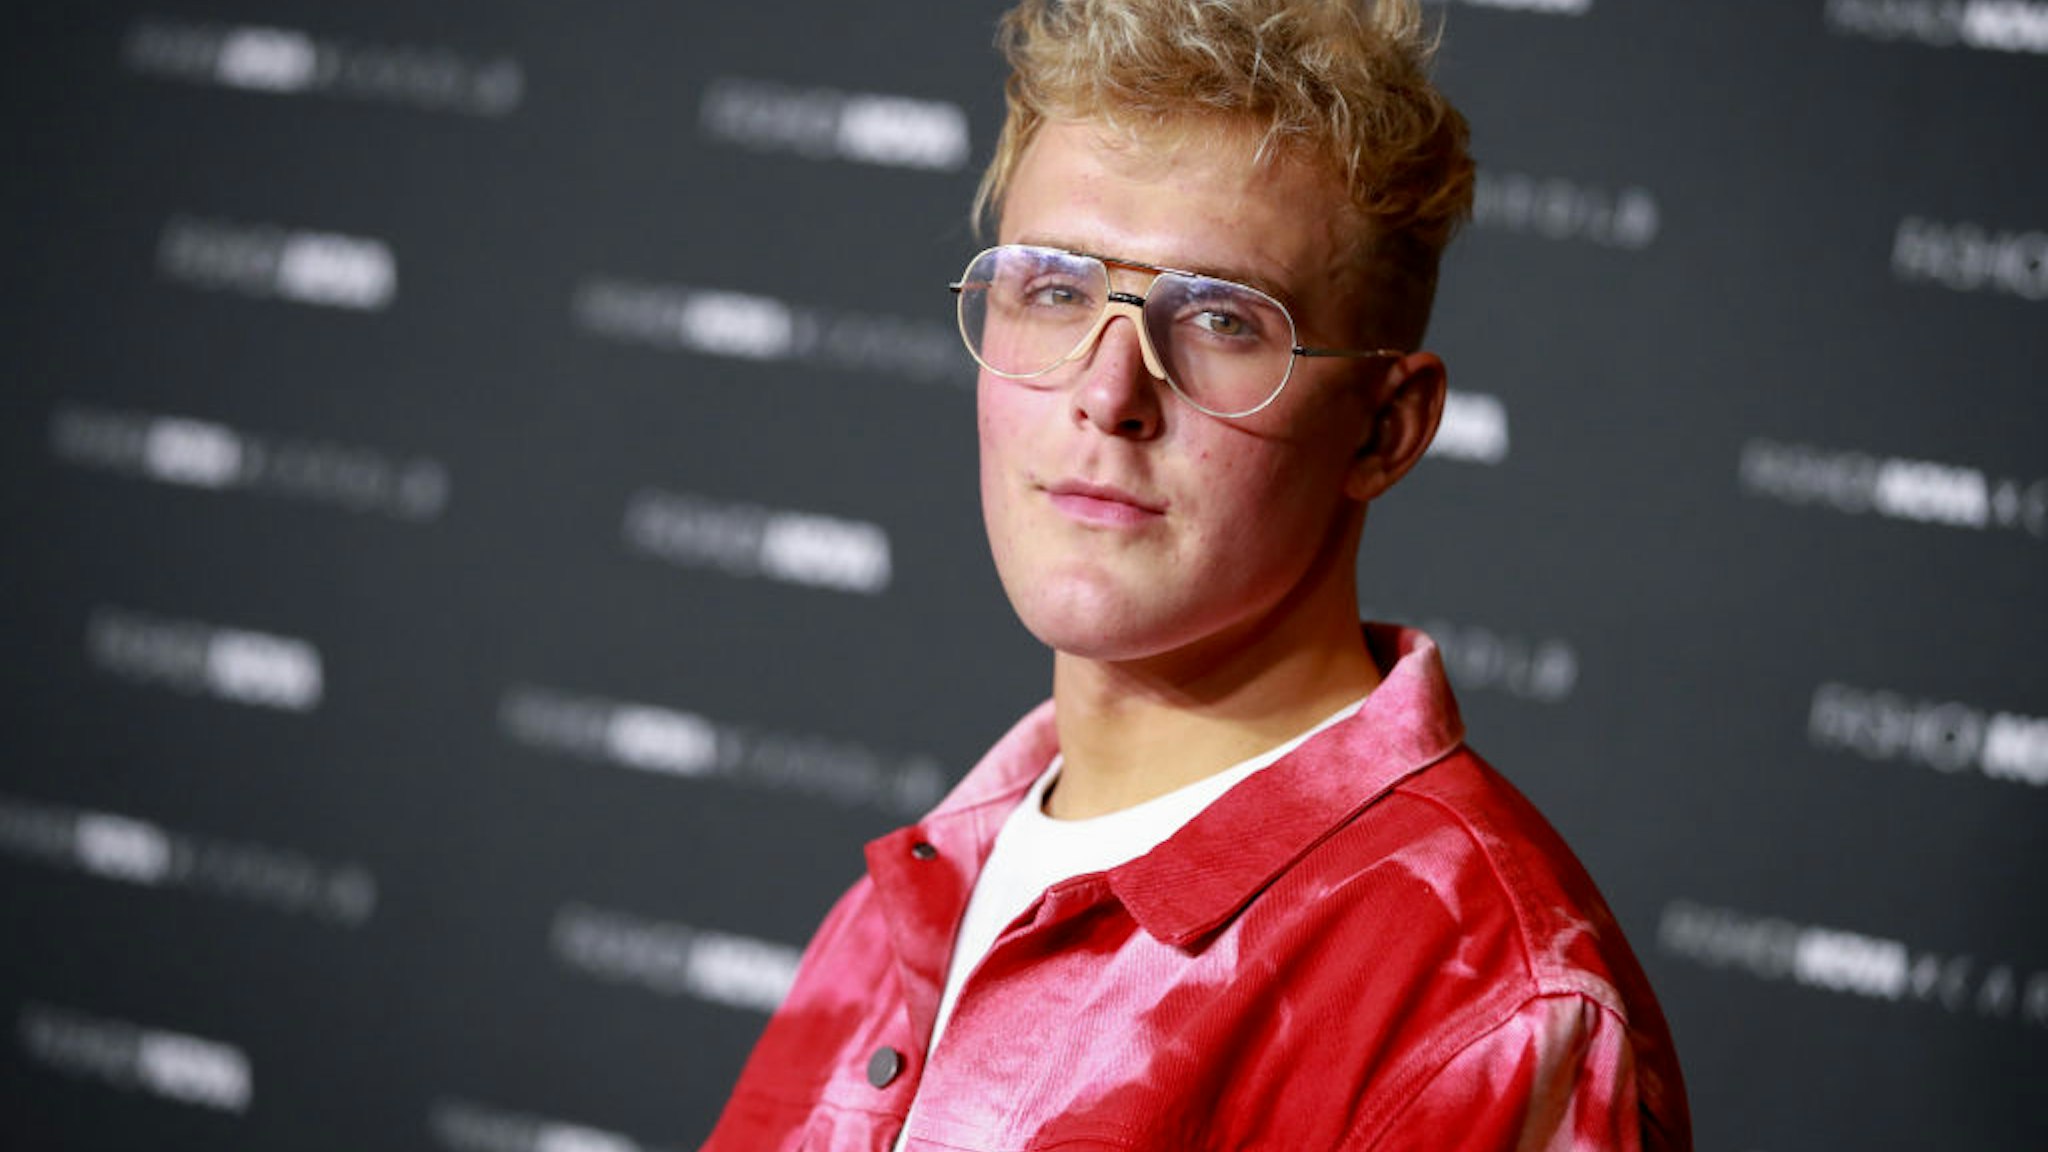 LOS ANGELES, CALIFORNIA - MAY 08: Jake Paul attends the Fashion Nova x Cardi B Collection Launch Party at Hollywood Palladium on May 08, 2019 in Los Angeles, California. (Photo by Rich Fury/Getty Images)